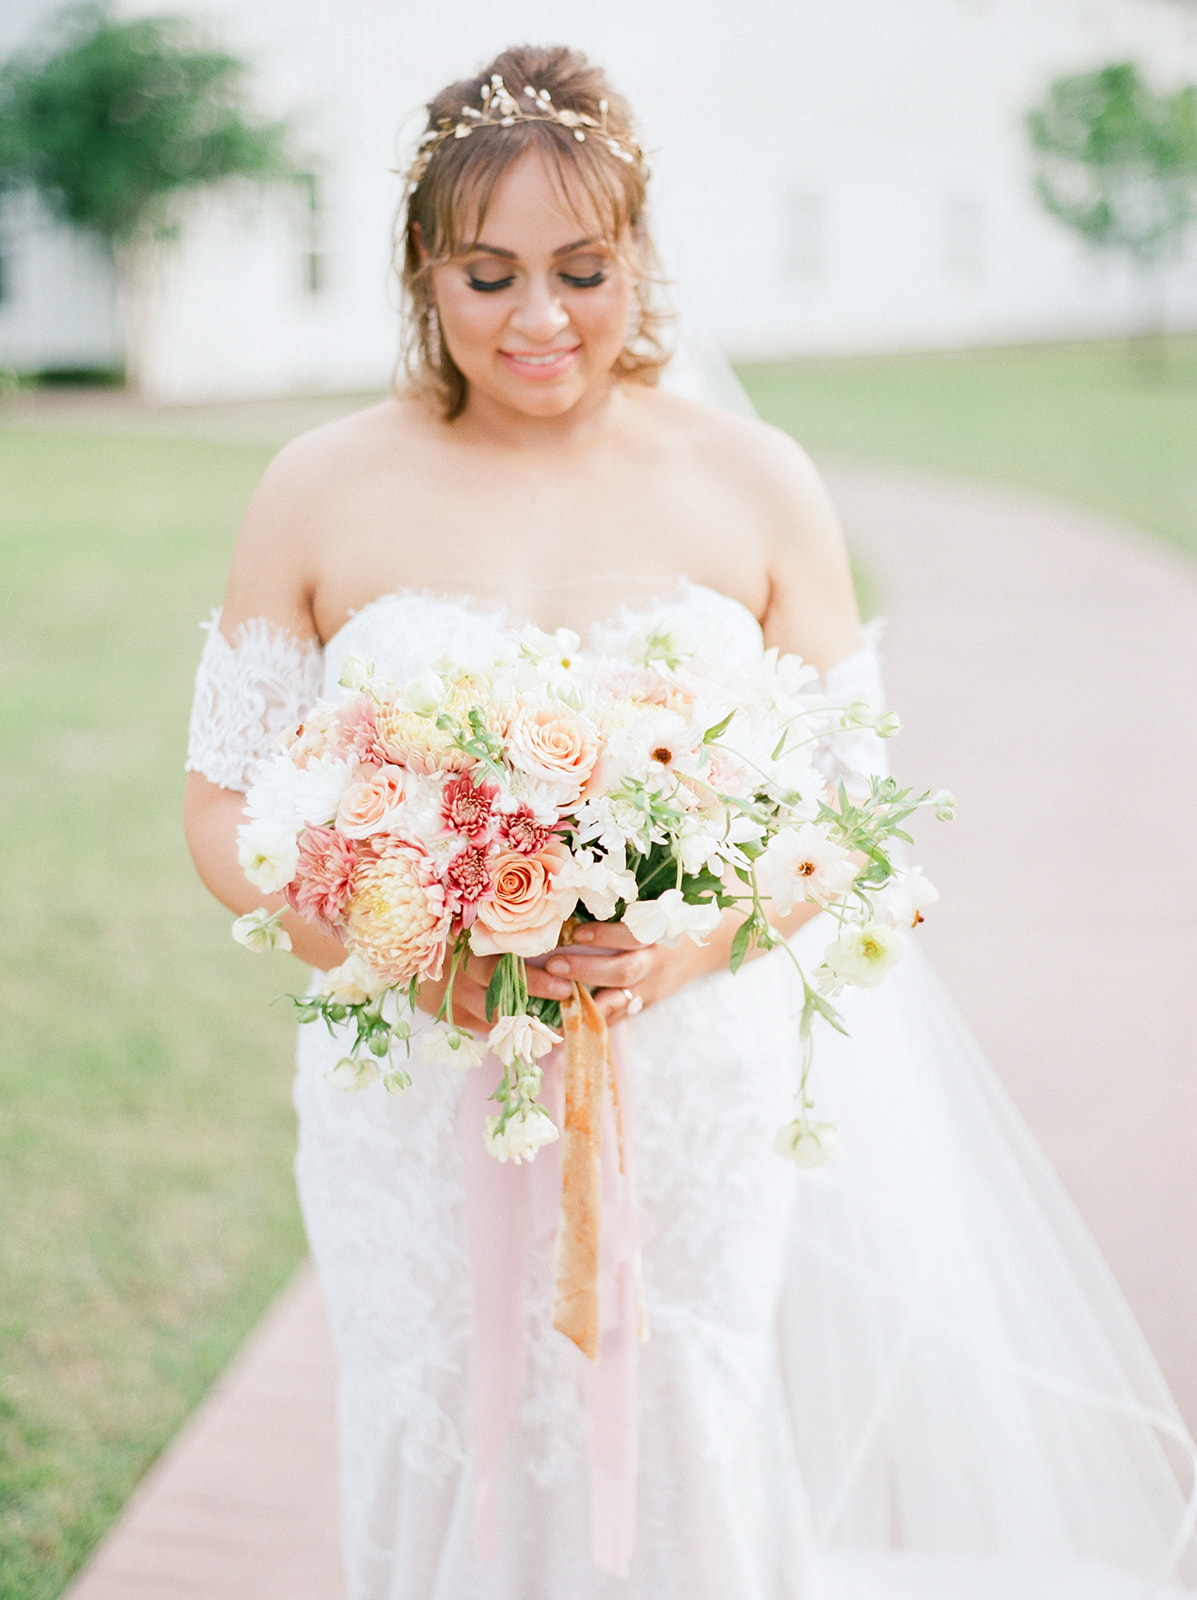 Golden Afternoon Wedding Inspiration – The Pretty Pear Bride